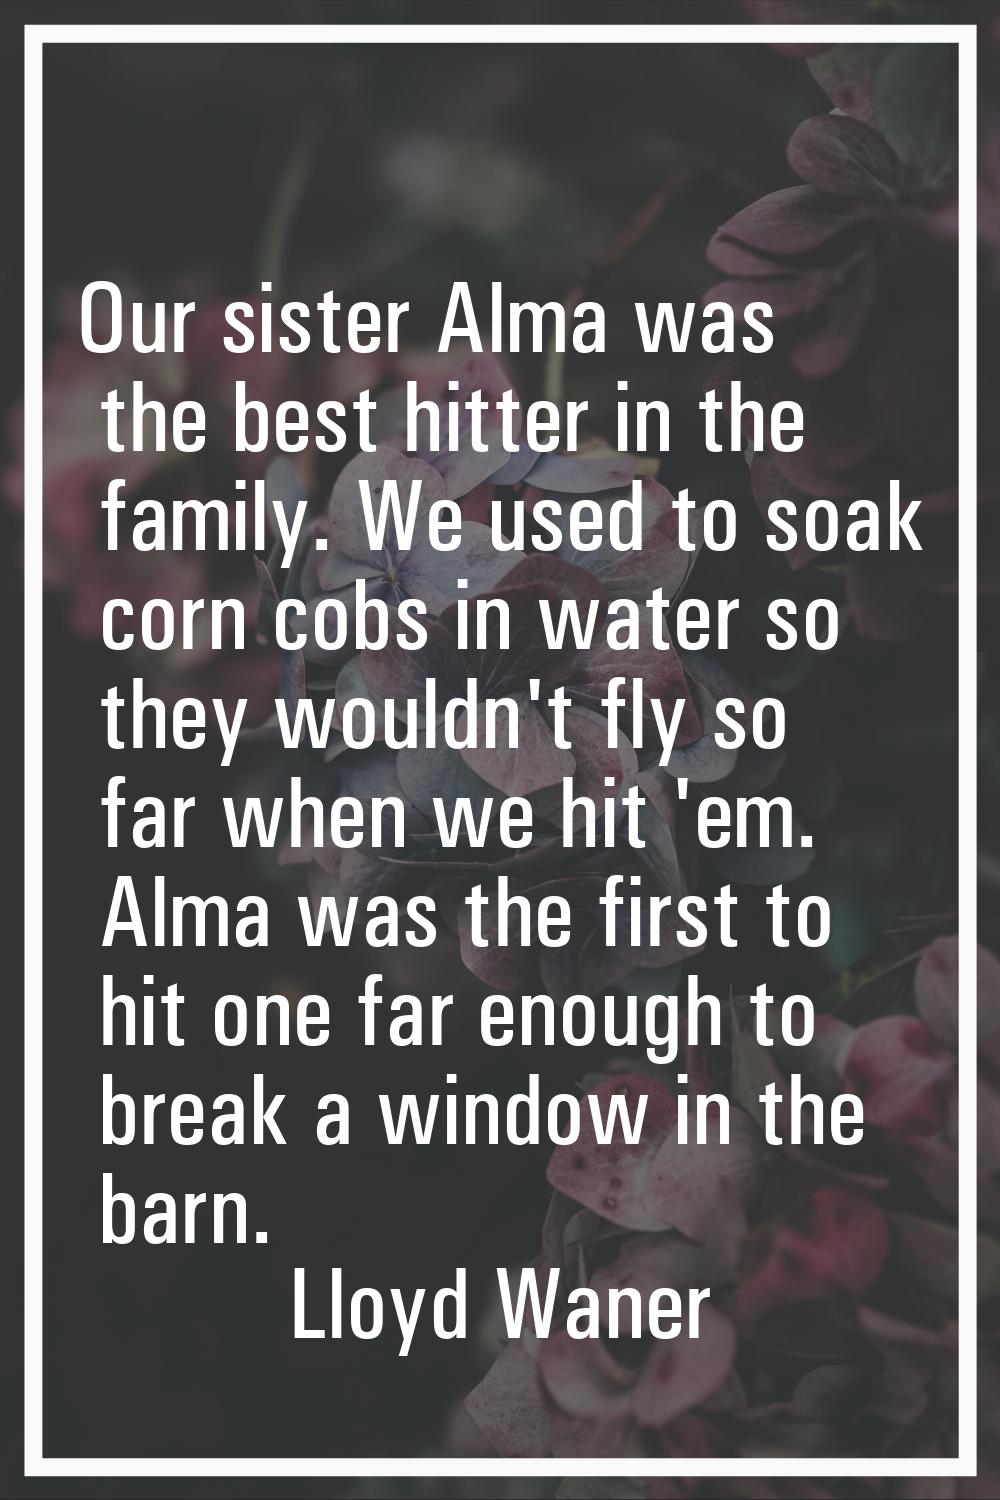 Our sister Alma was the best hitter in the family. We used to soak corn cobs in water so they would